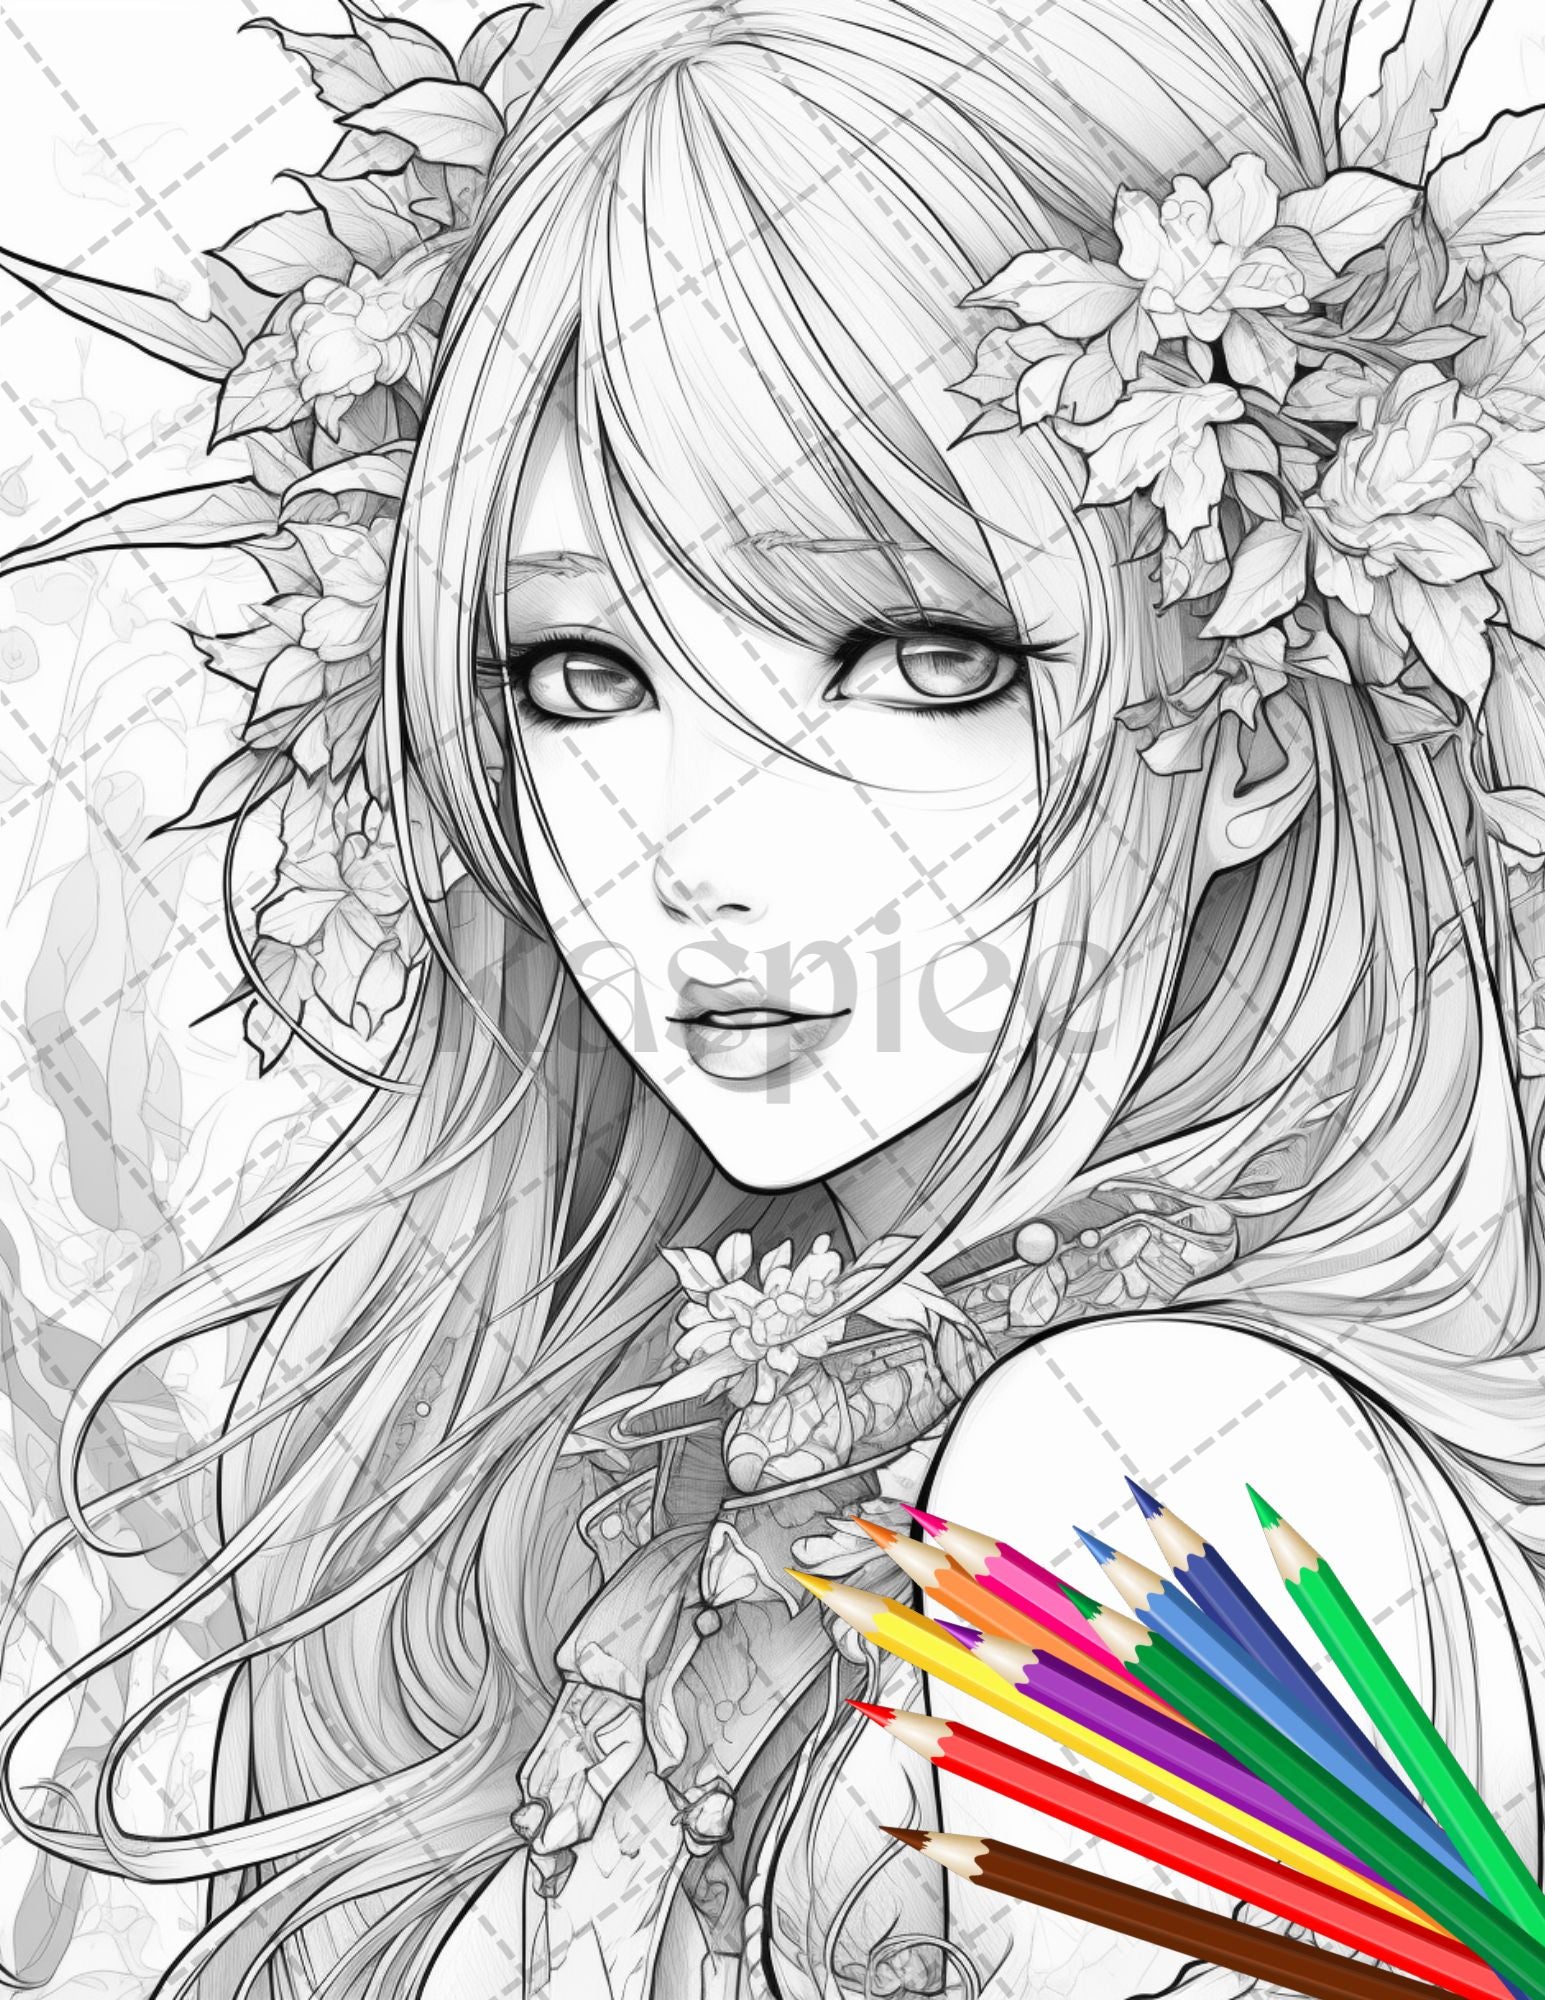 Manga / Anime - Coloring Pages for Adults